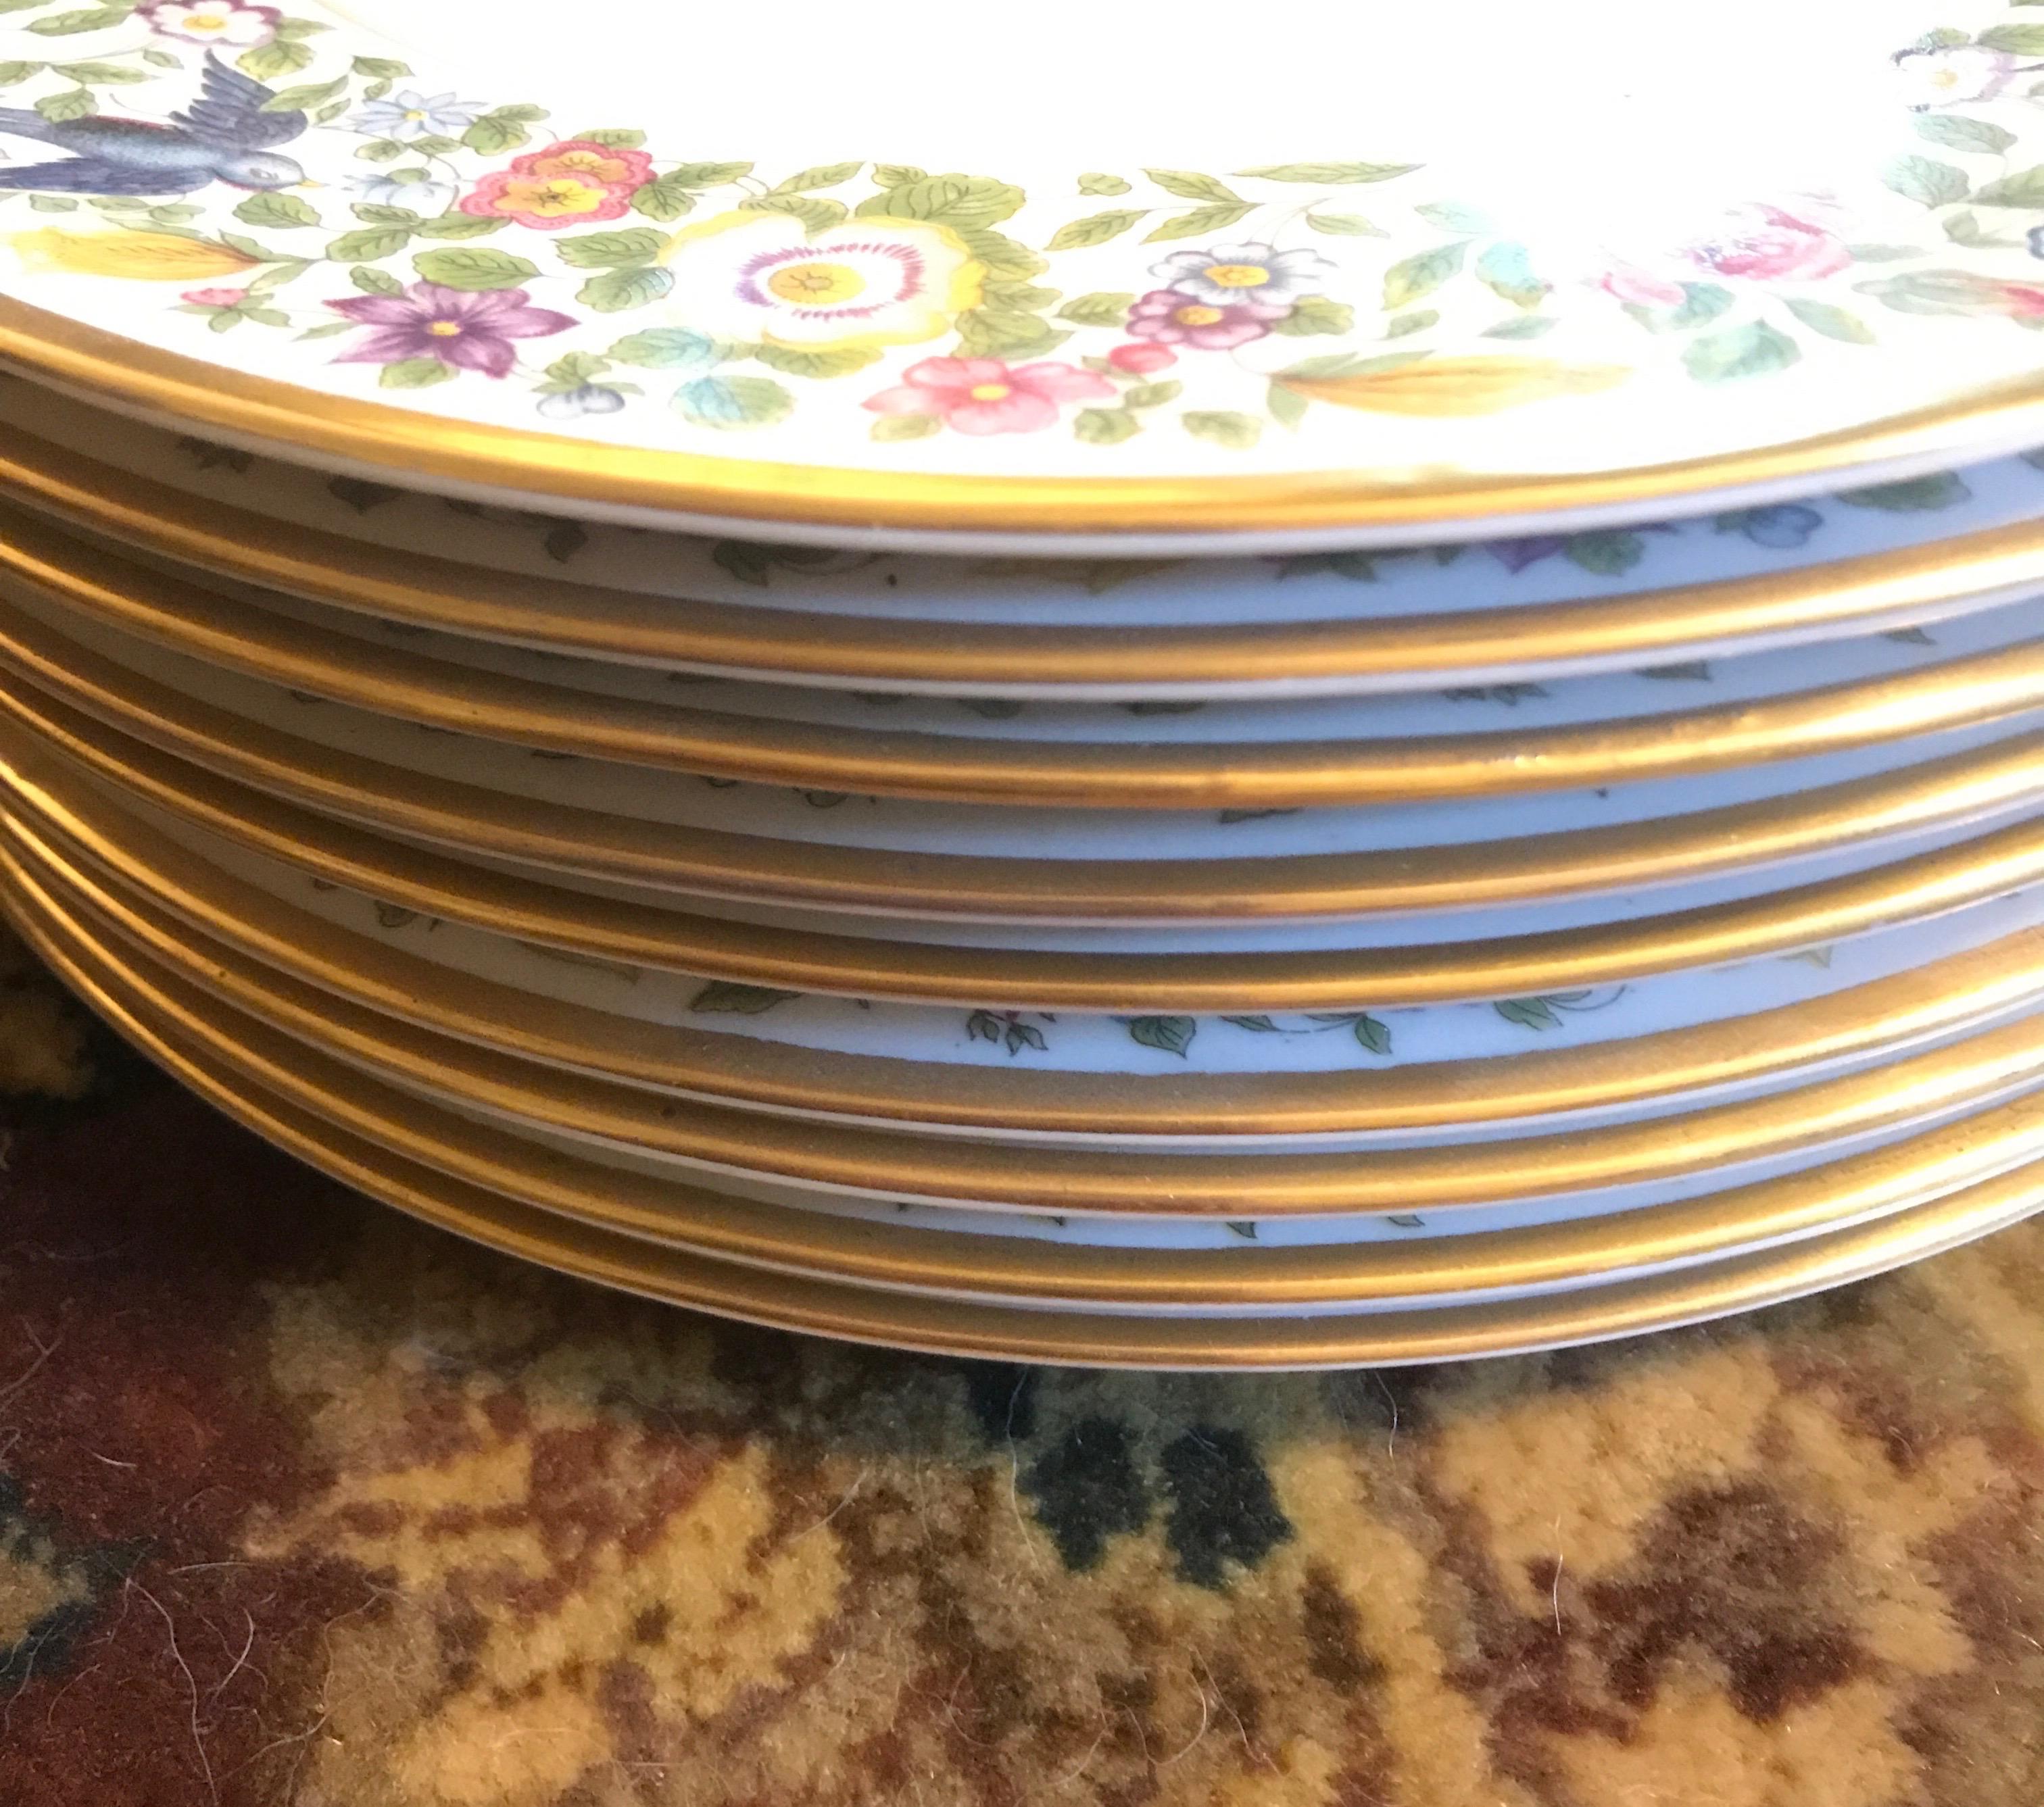 Mid-20th Century Set of 9 Lamberton China Service Plates For Sale